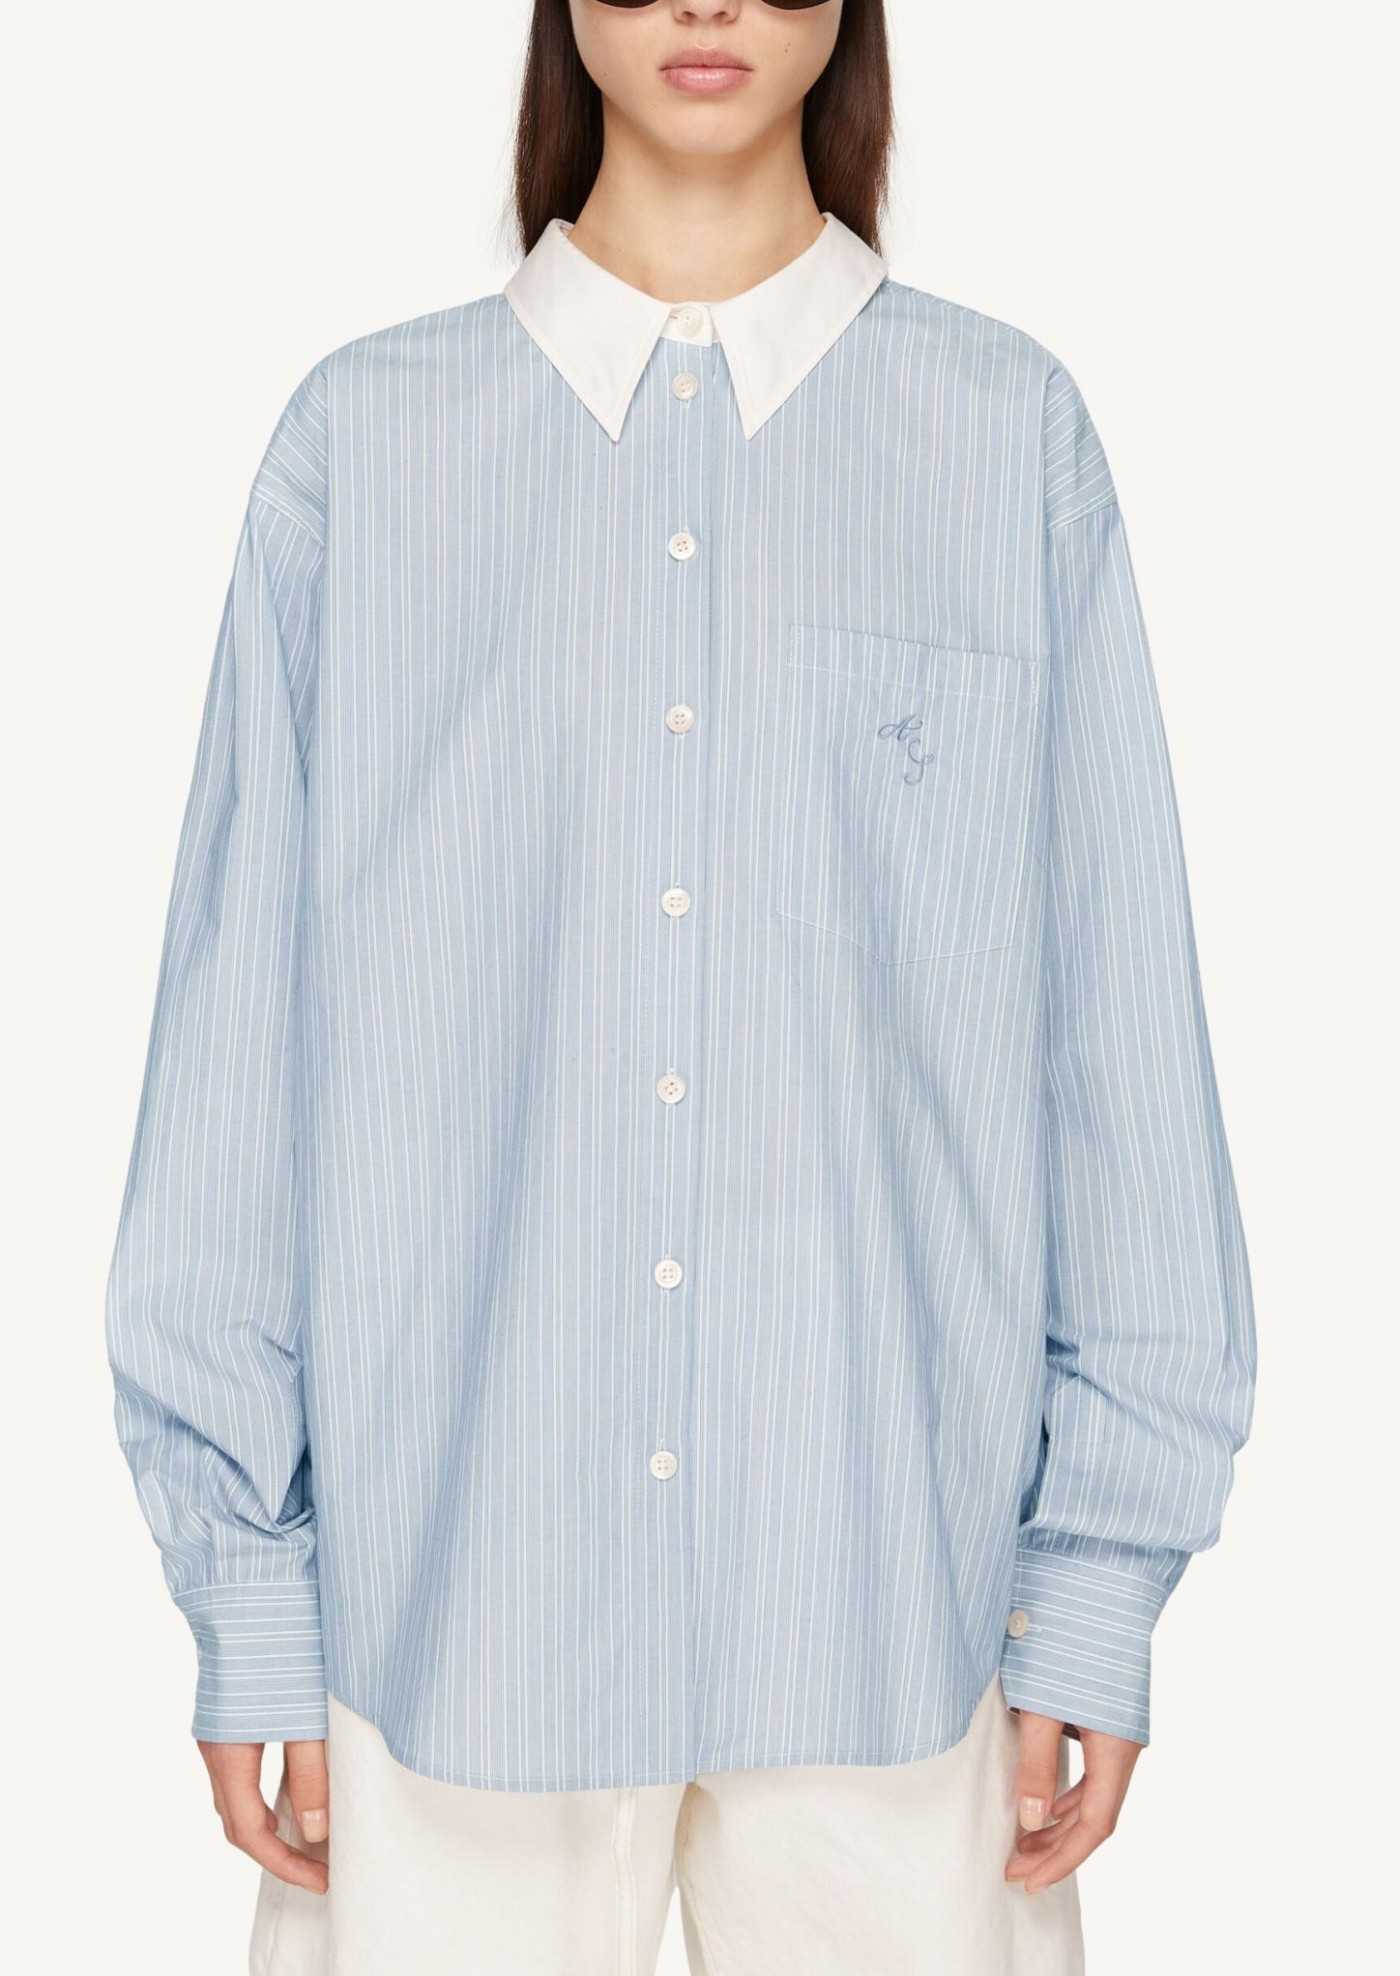 Shirt with blue/white stripes